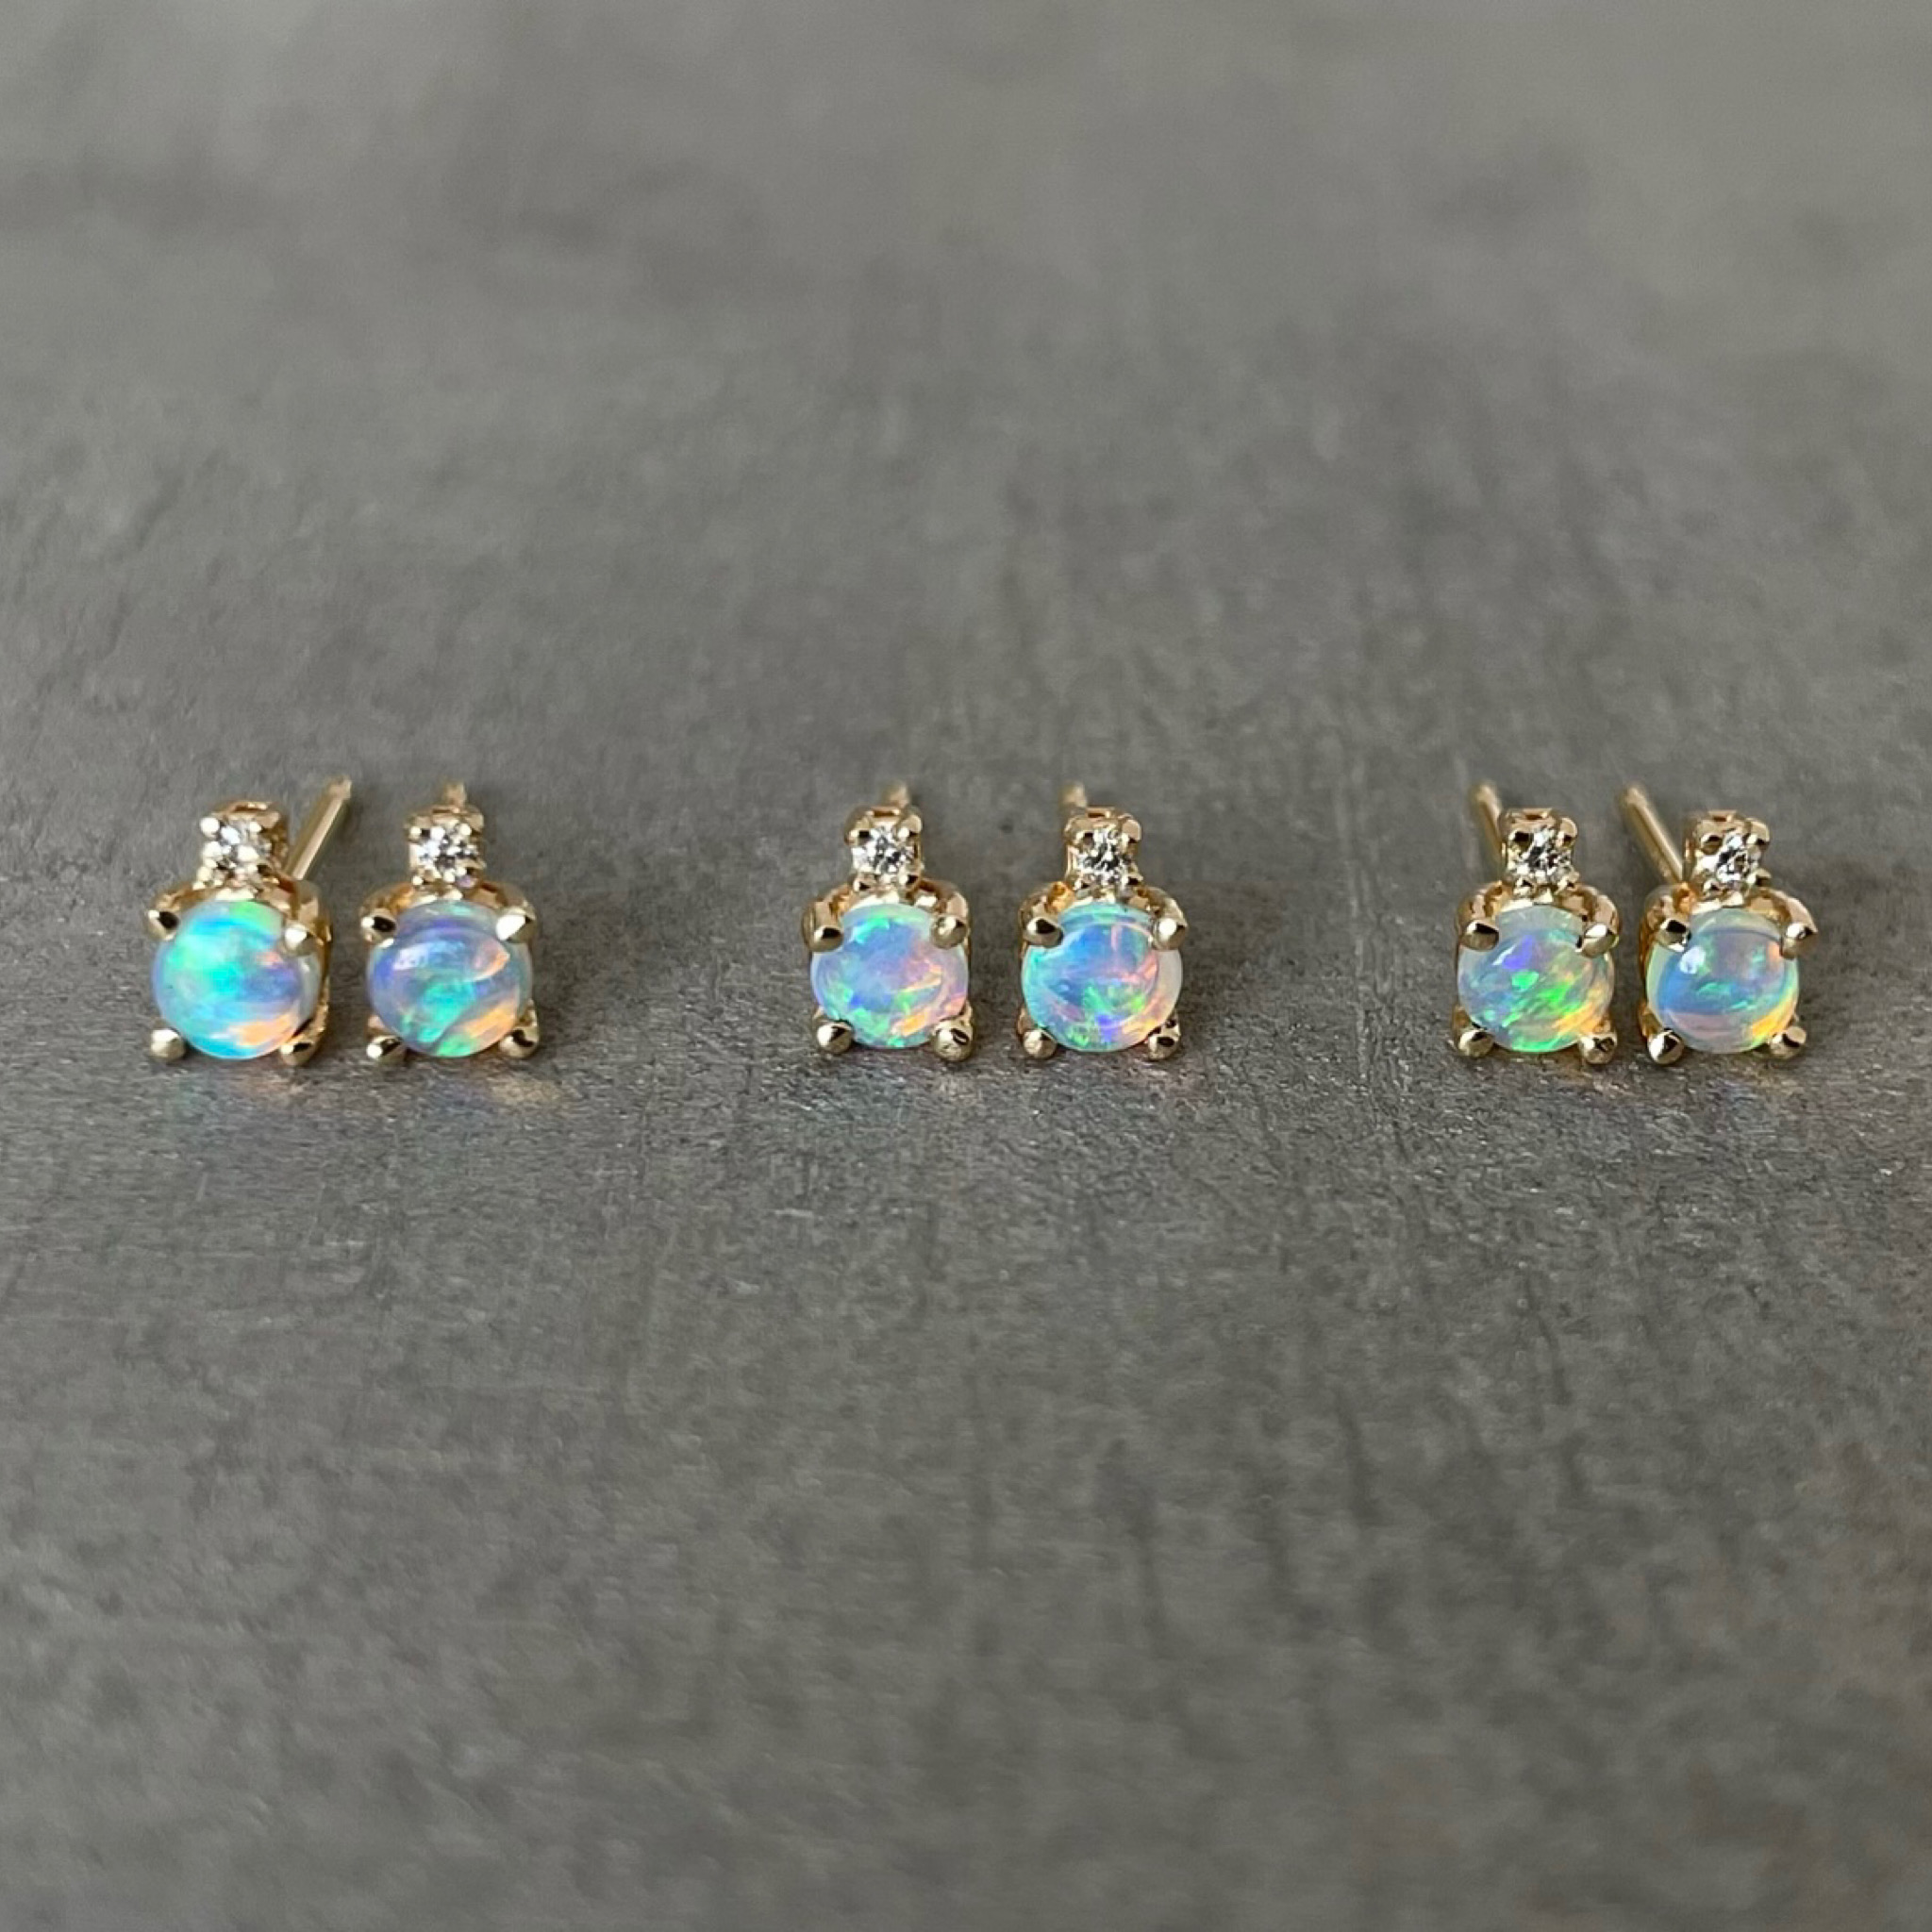 overdrivelse Stewart ø lever 14K Yellow gold earrings with Australian crystal opals and White diamonds -  JasmineJewelryShop